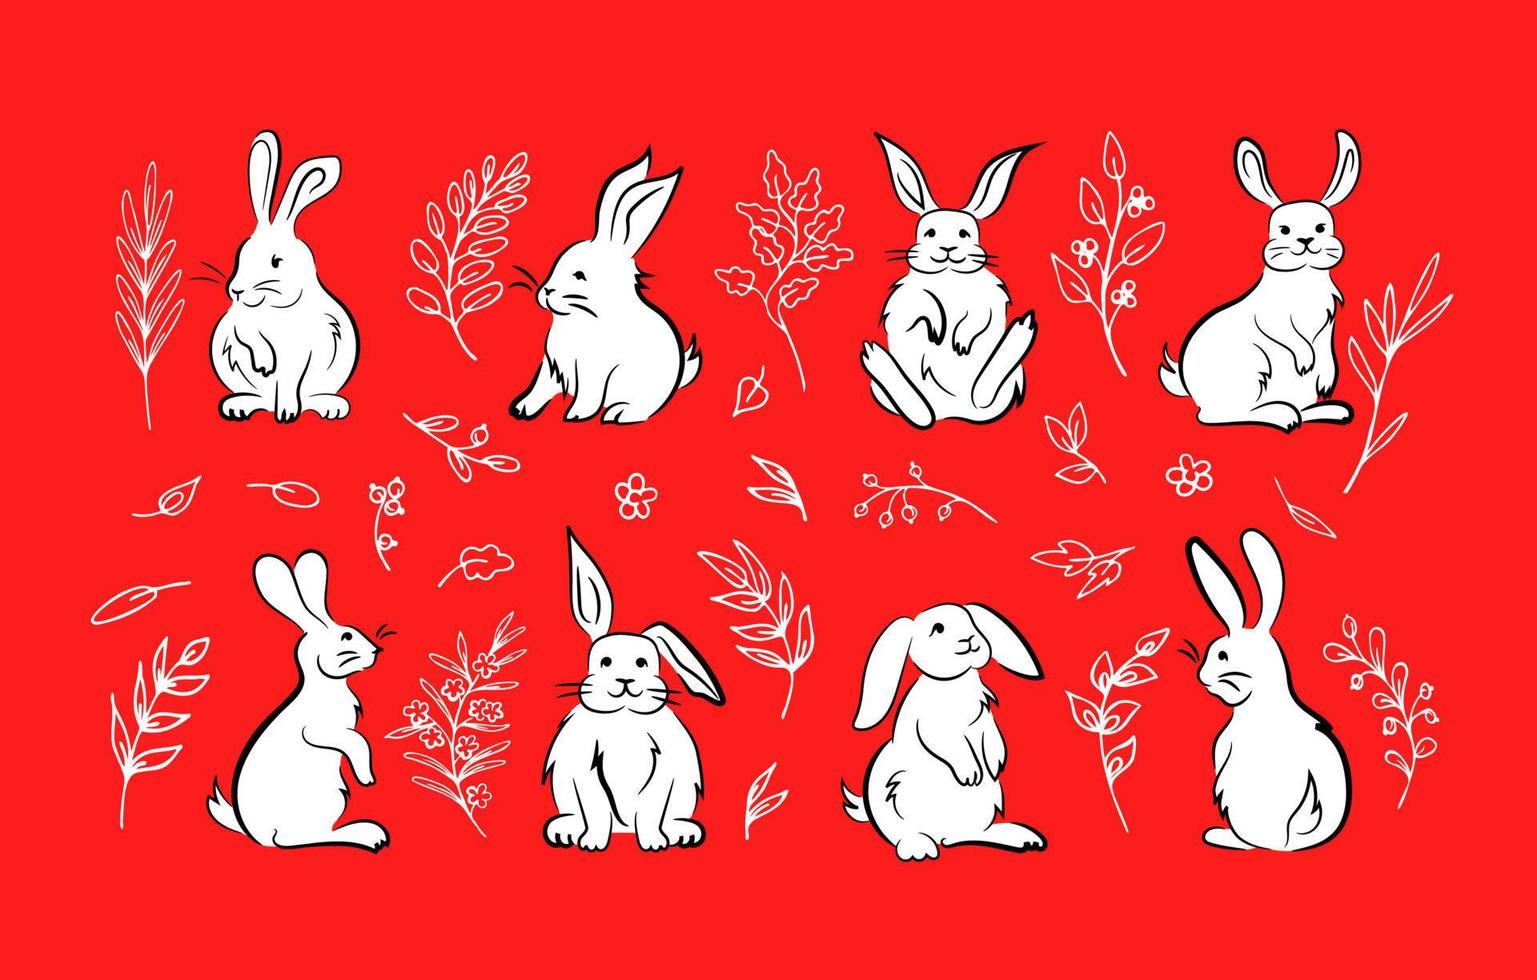 Funny cute Easter bunnies in various sitting poses, white hand drawn cartoon animals. White outlines of decorative fantasy herbs on red background. Doodle designs for prints, coloring book clip art vector